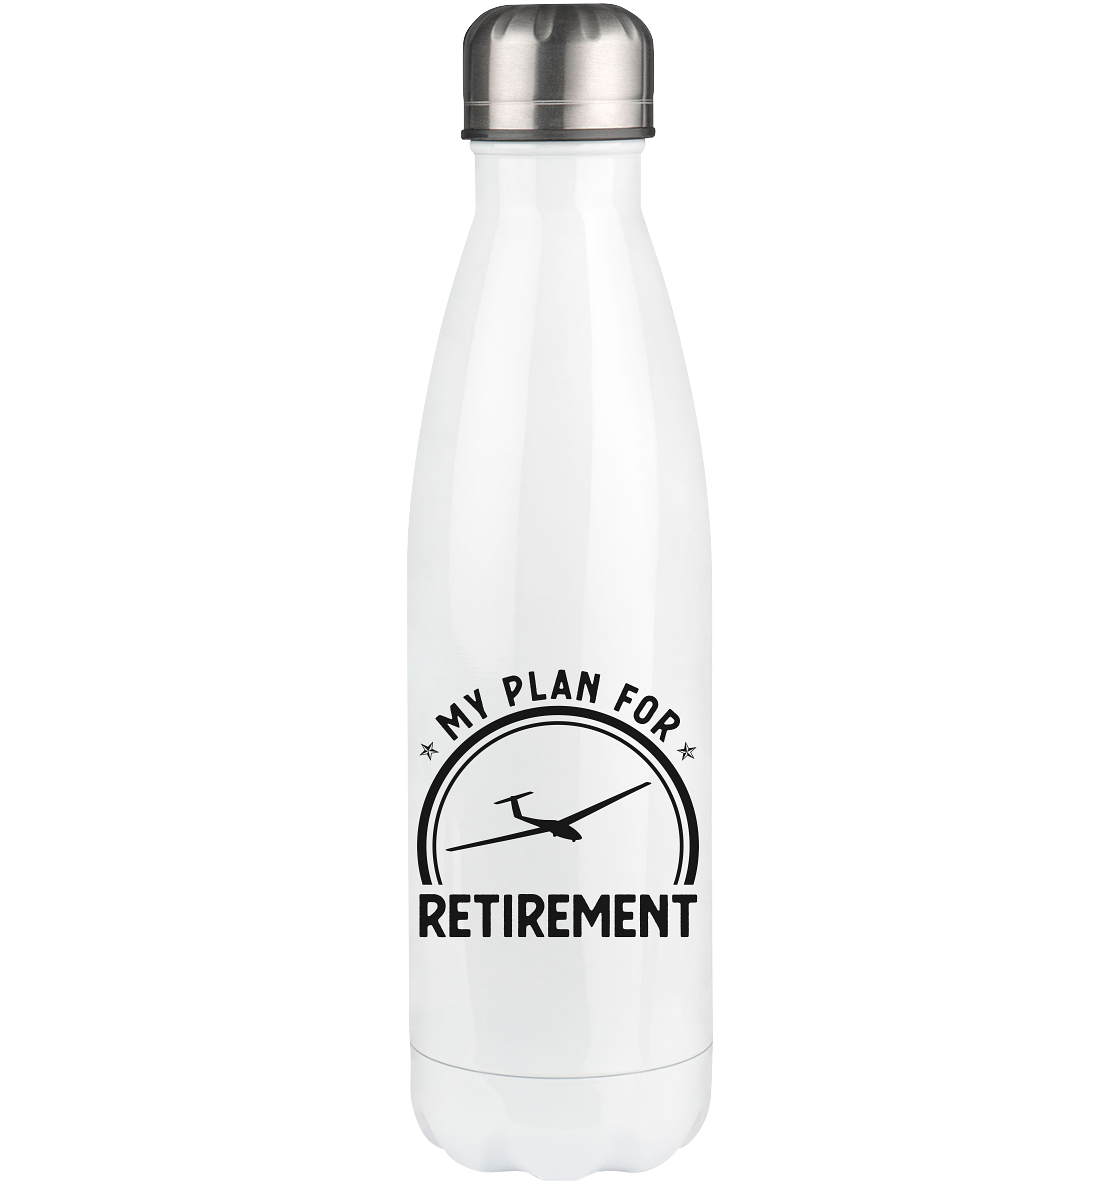 My Plan For Retirement 2 - Edelstahl Thermosflasche berge 500ml